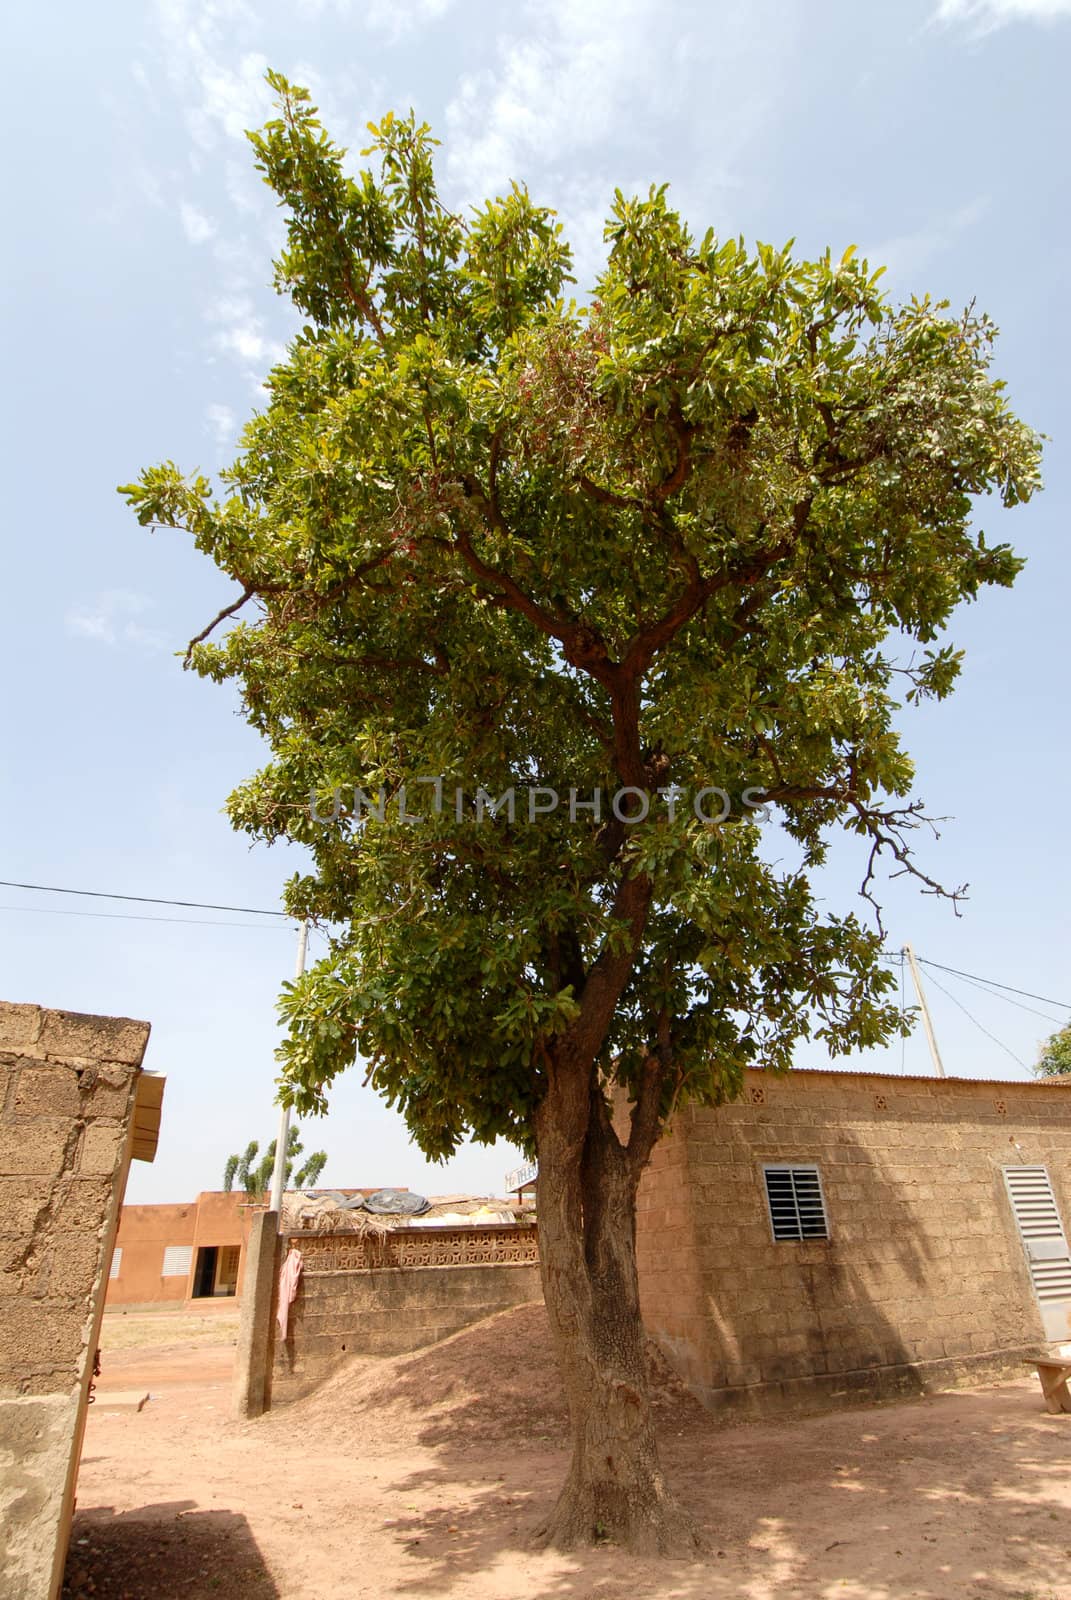 shea butter tree by africa